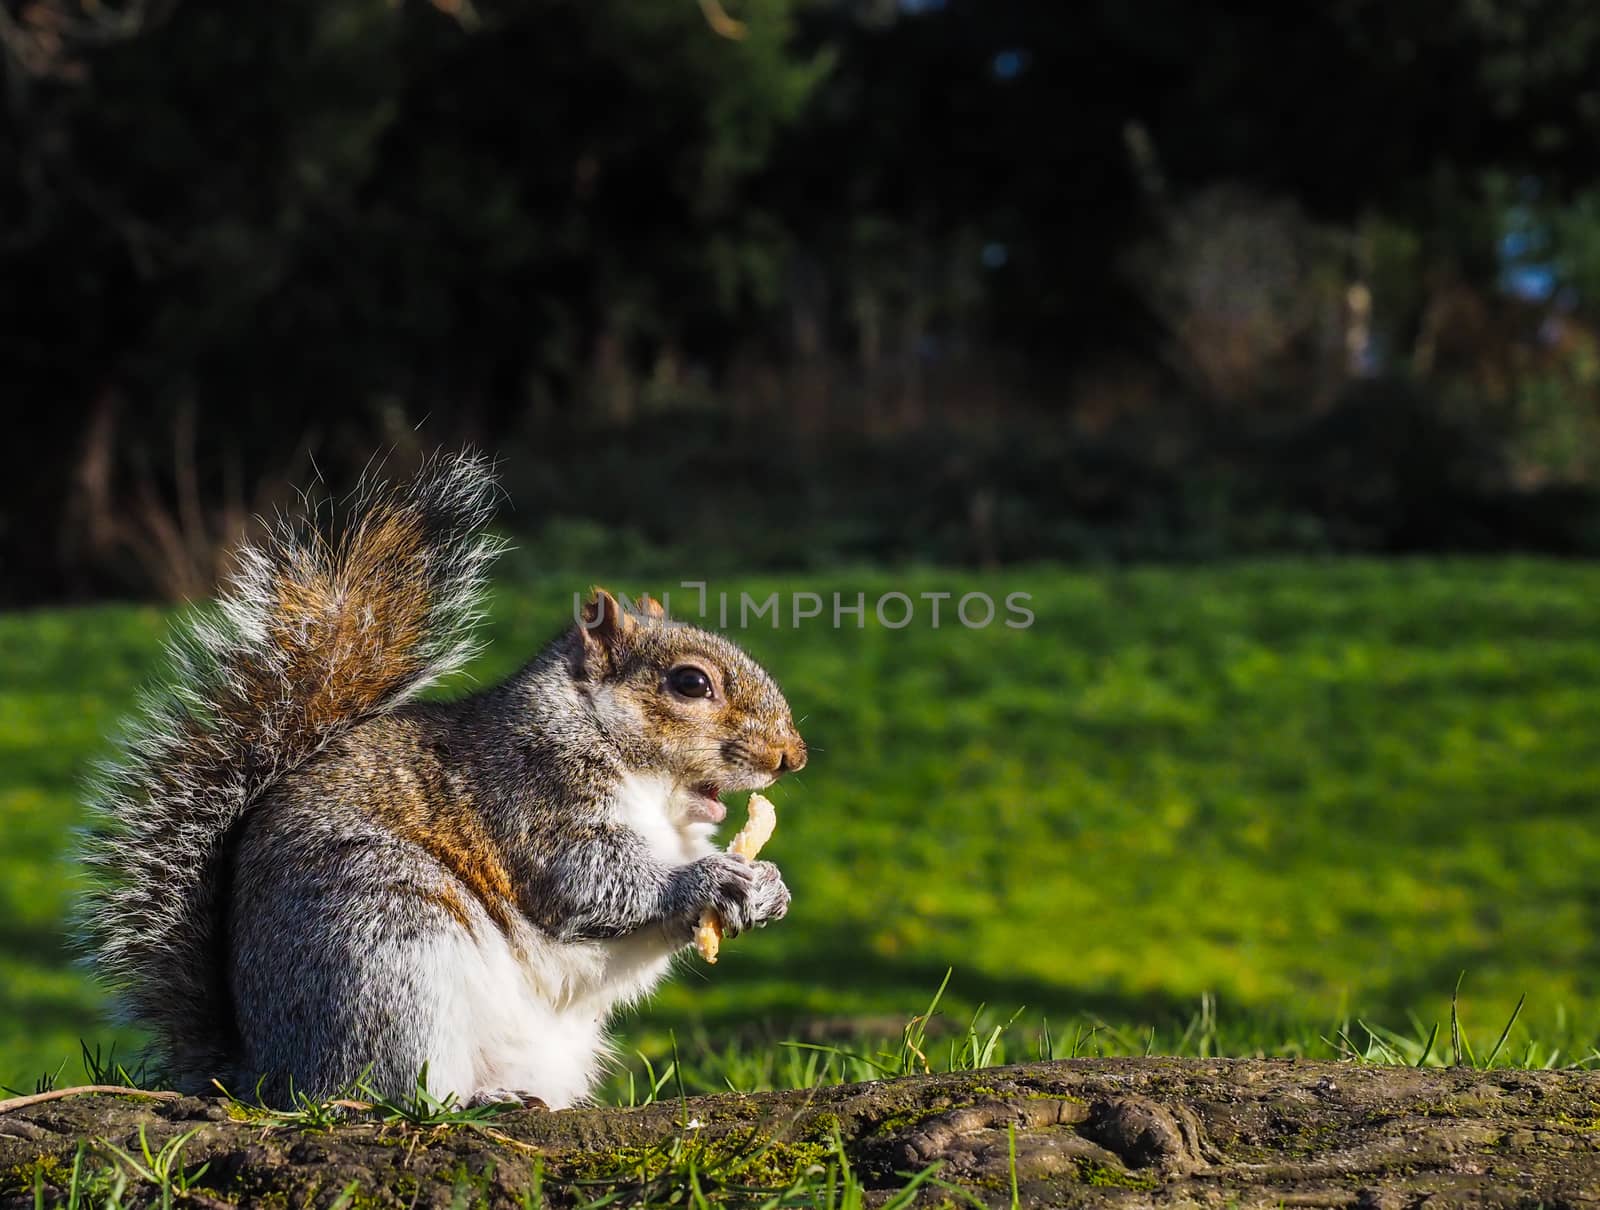 Squirrel eating on a treat in a park in sunlight with green grass